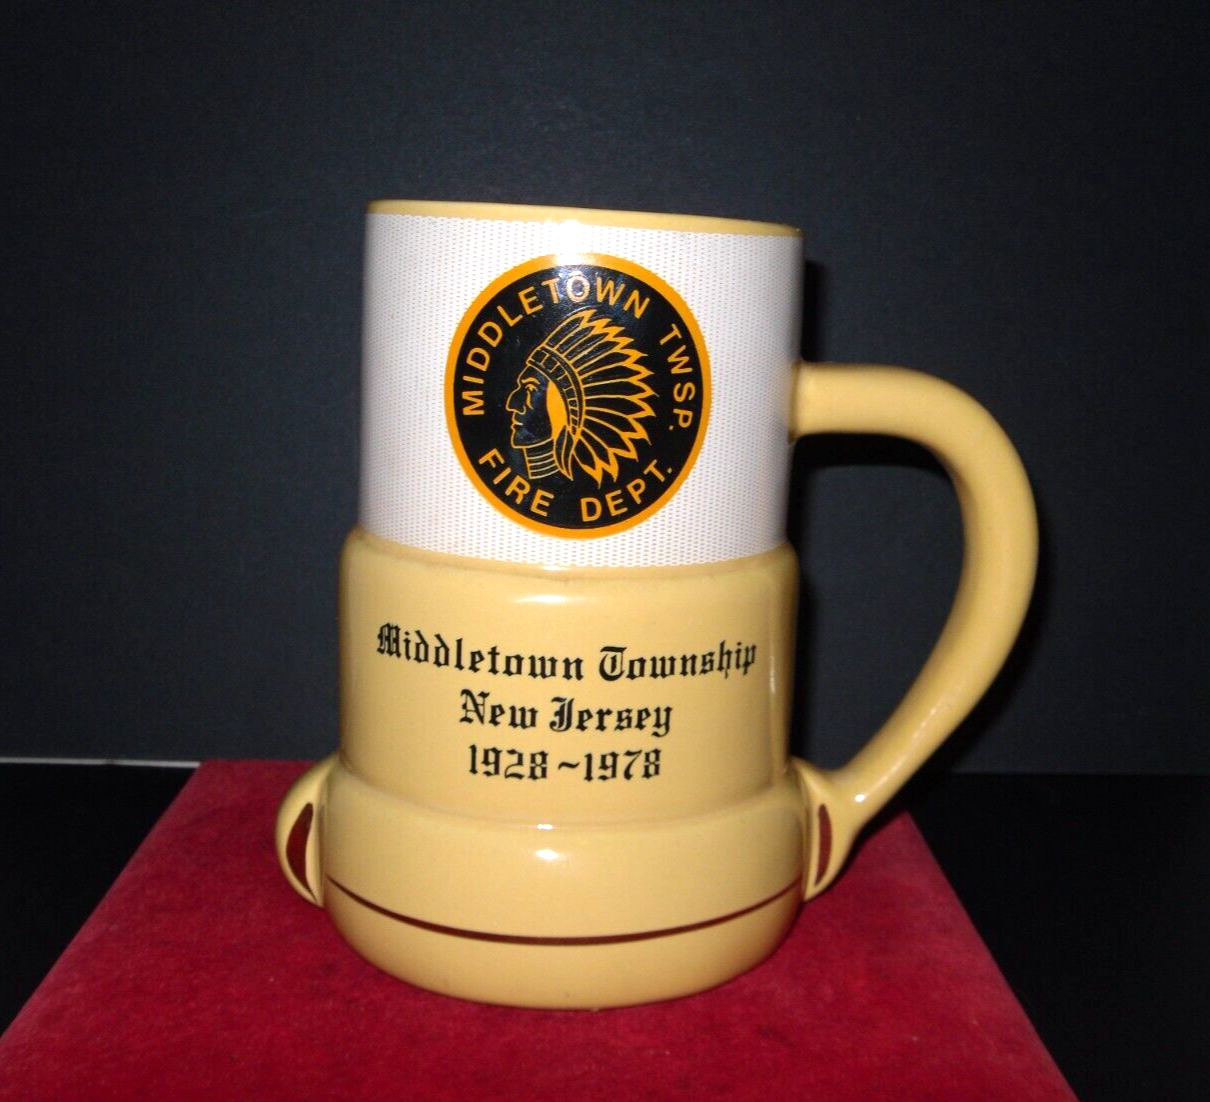 Vintage 1978 Fire Department Mug Middletown Township New Jersey 1928 - 1978